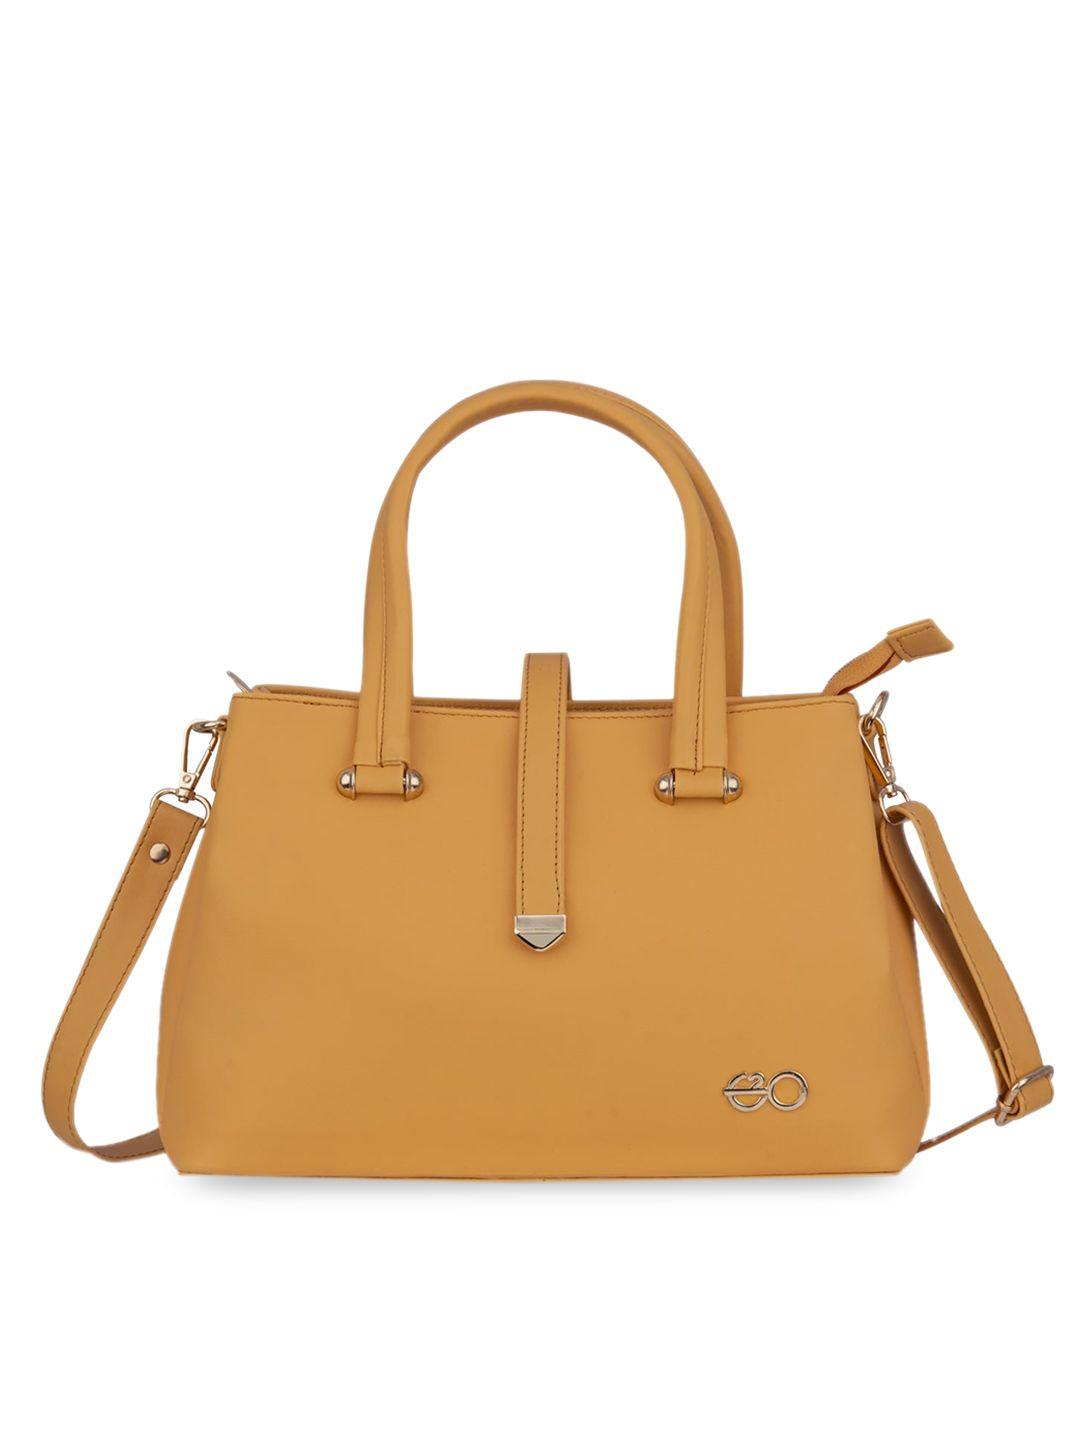 e2o mustard yellow solid structured handheld bag